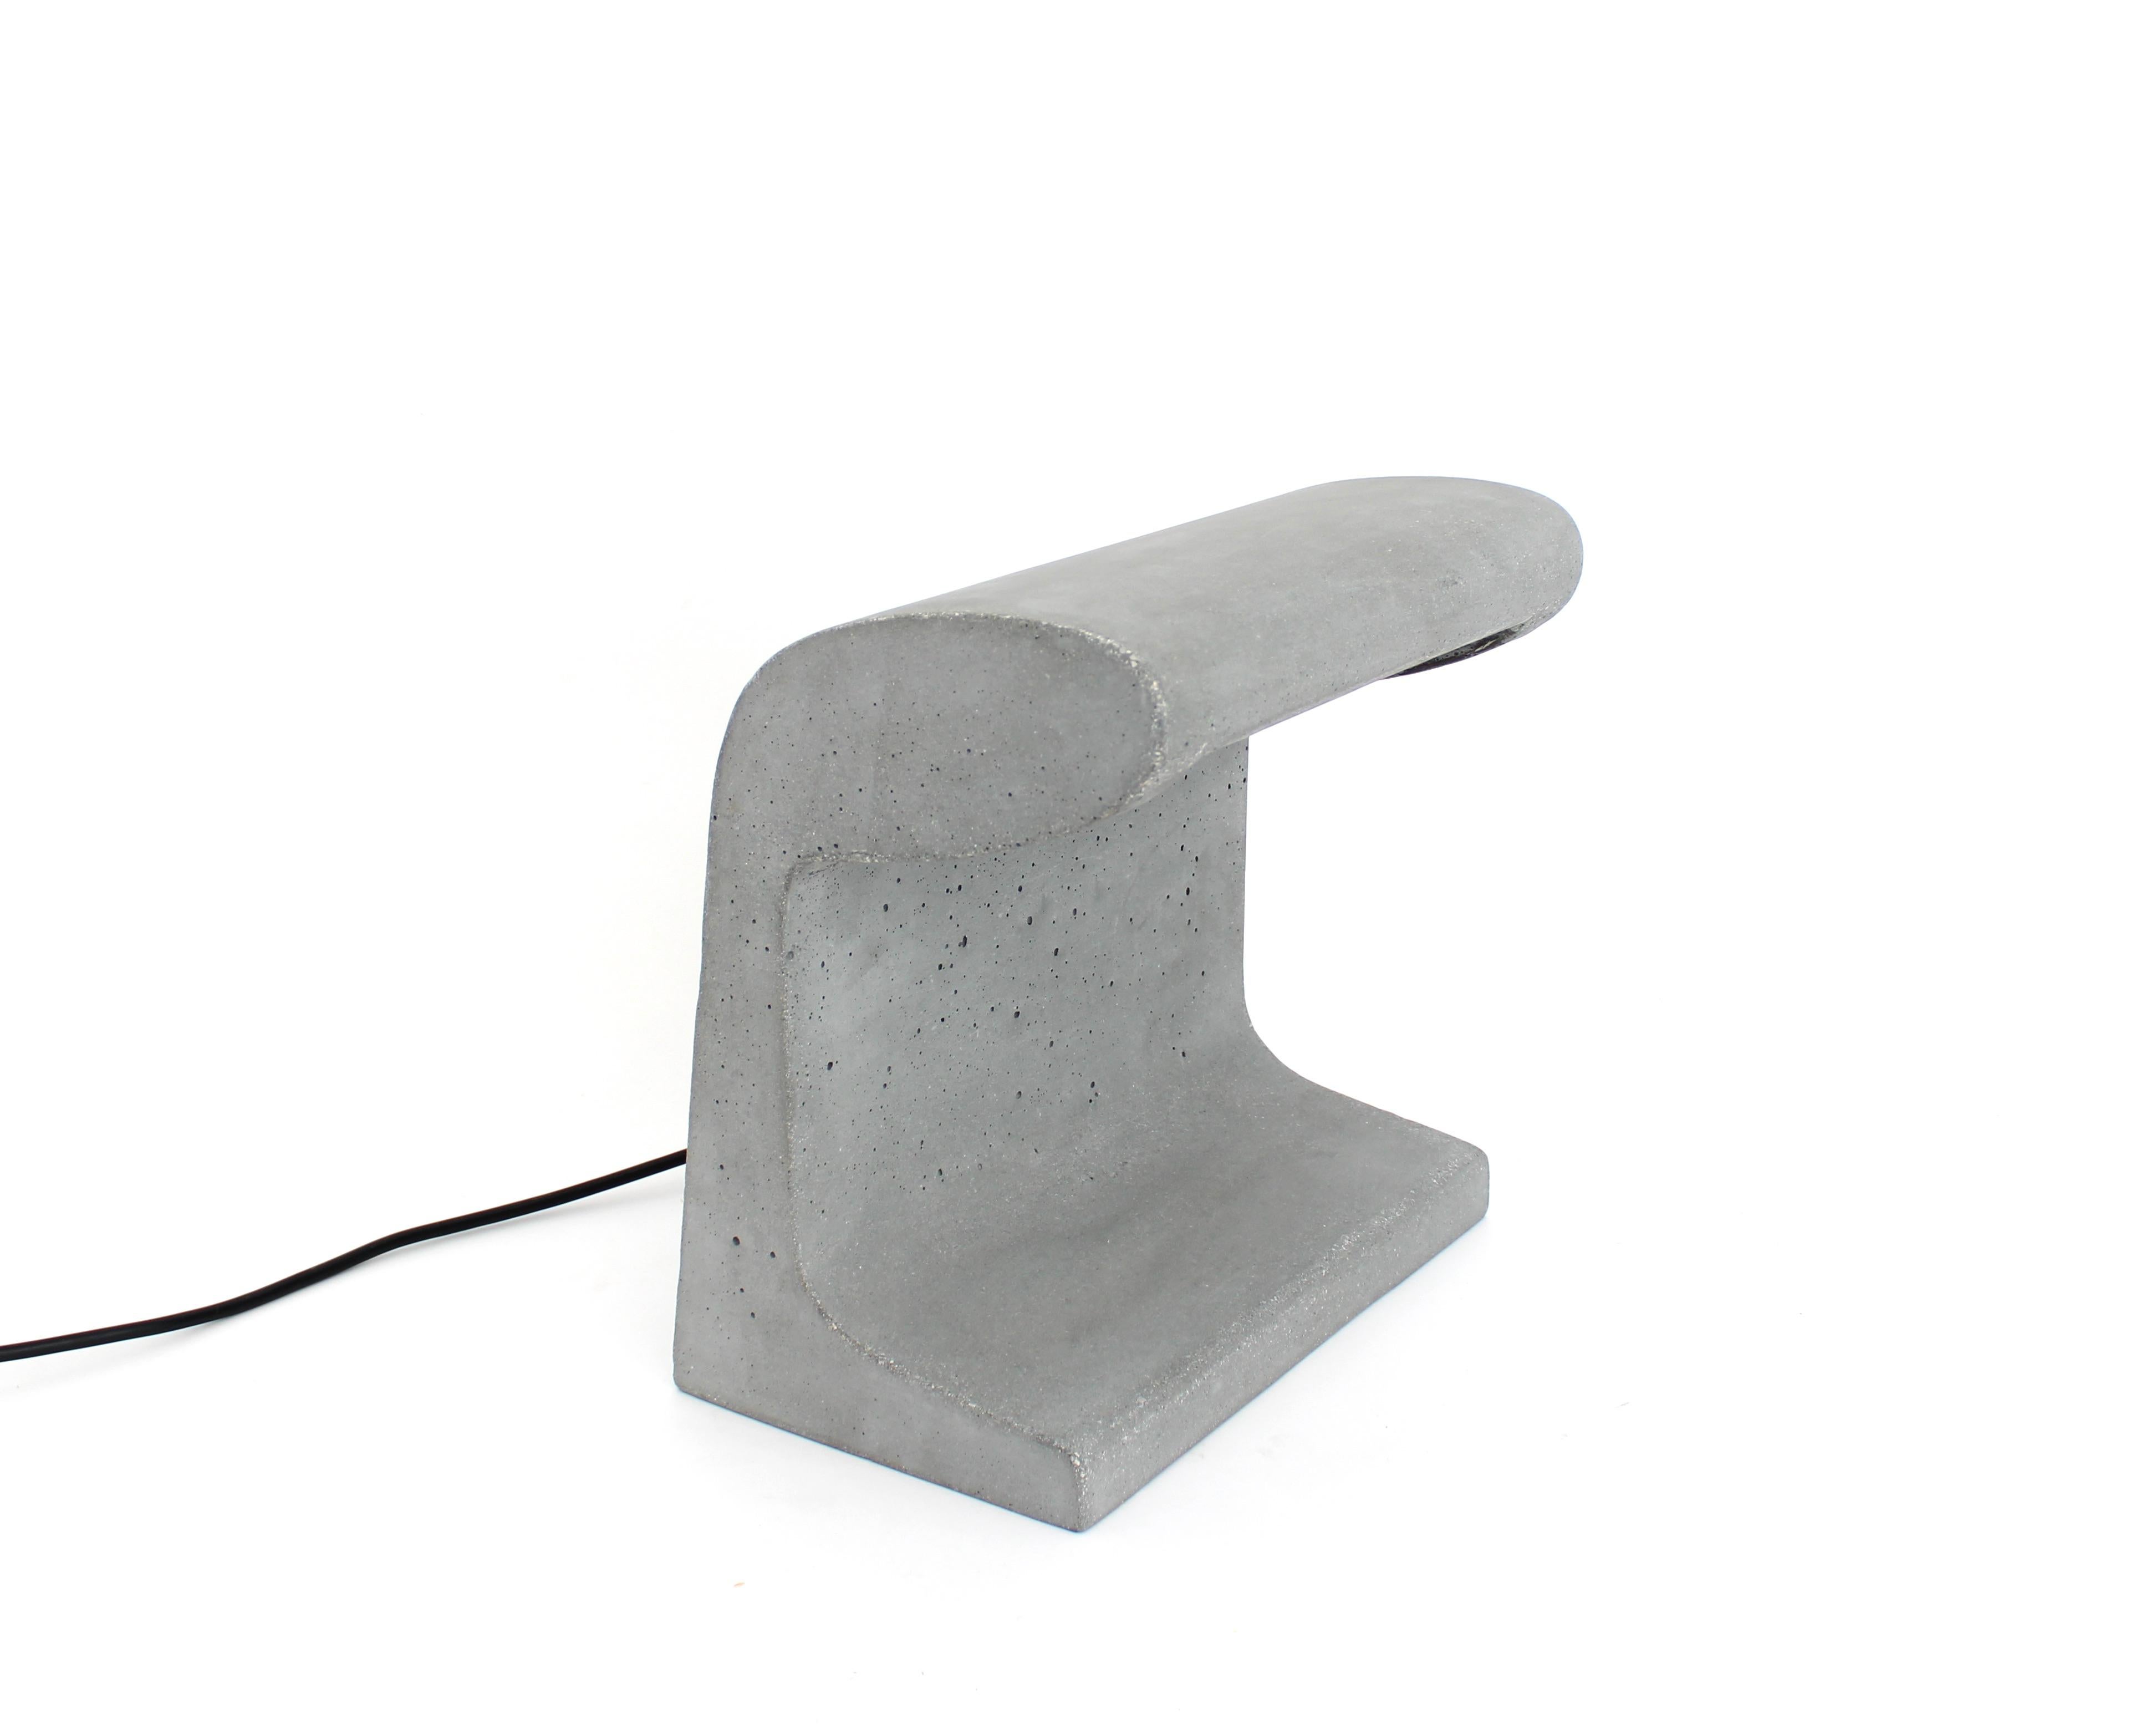 Borne Bétone Petite table lamp by Le Corbusier. 
Current production manufactured in France by Nemo Lighting. Concrete outdoor and indoor floor and table lamp, conceived for the Unité d’habitation de Marseille and for Bhakra Dam, Sukhna Dam in India